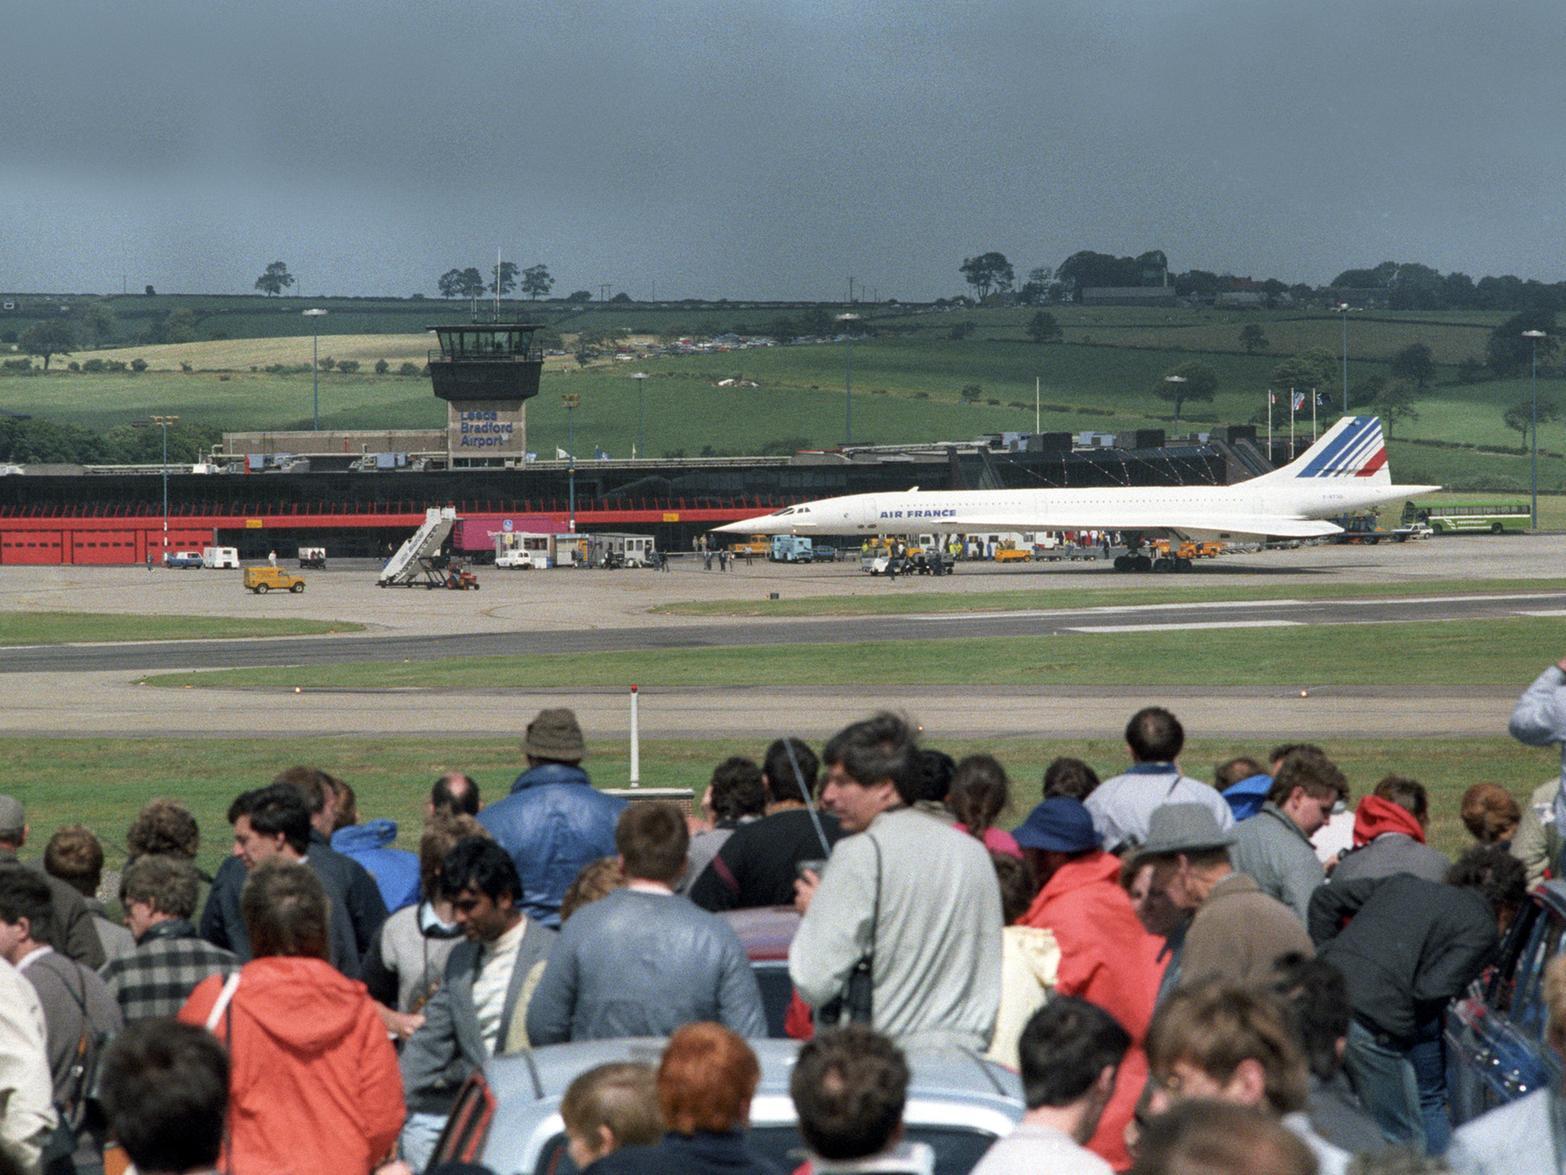 More than 70,000 people turned out to watch the first Concorde land at LBA on August 2, 1986.